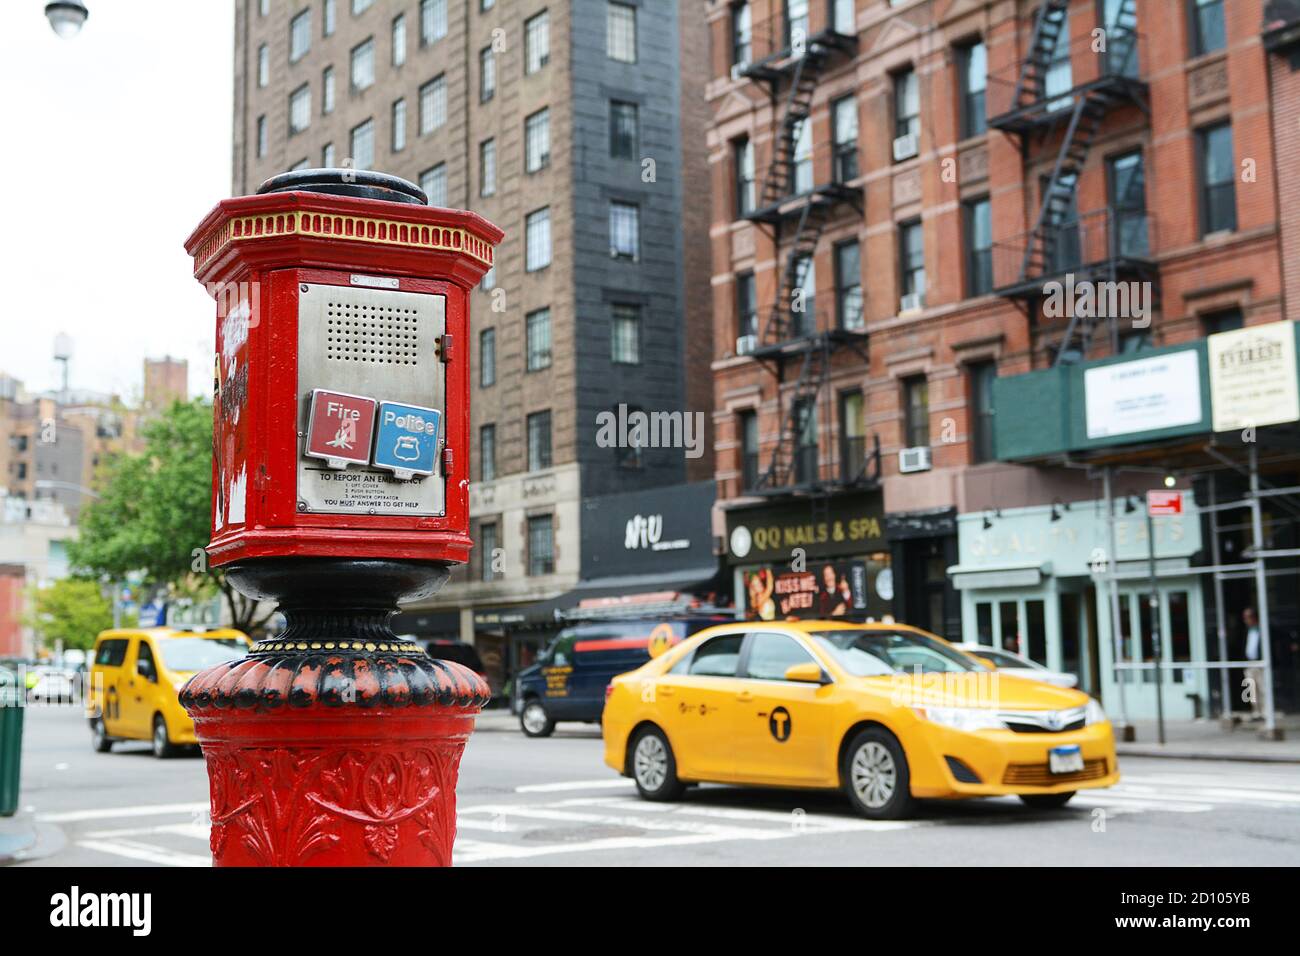 NEW YORK, USA - MAY 10, 2019: Detail of fire alarm pull box on the corner of Greenwich Avenue and West 10th Street in New York City on May 10, 2019. Y Stock Photo